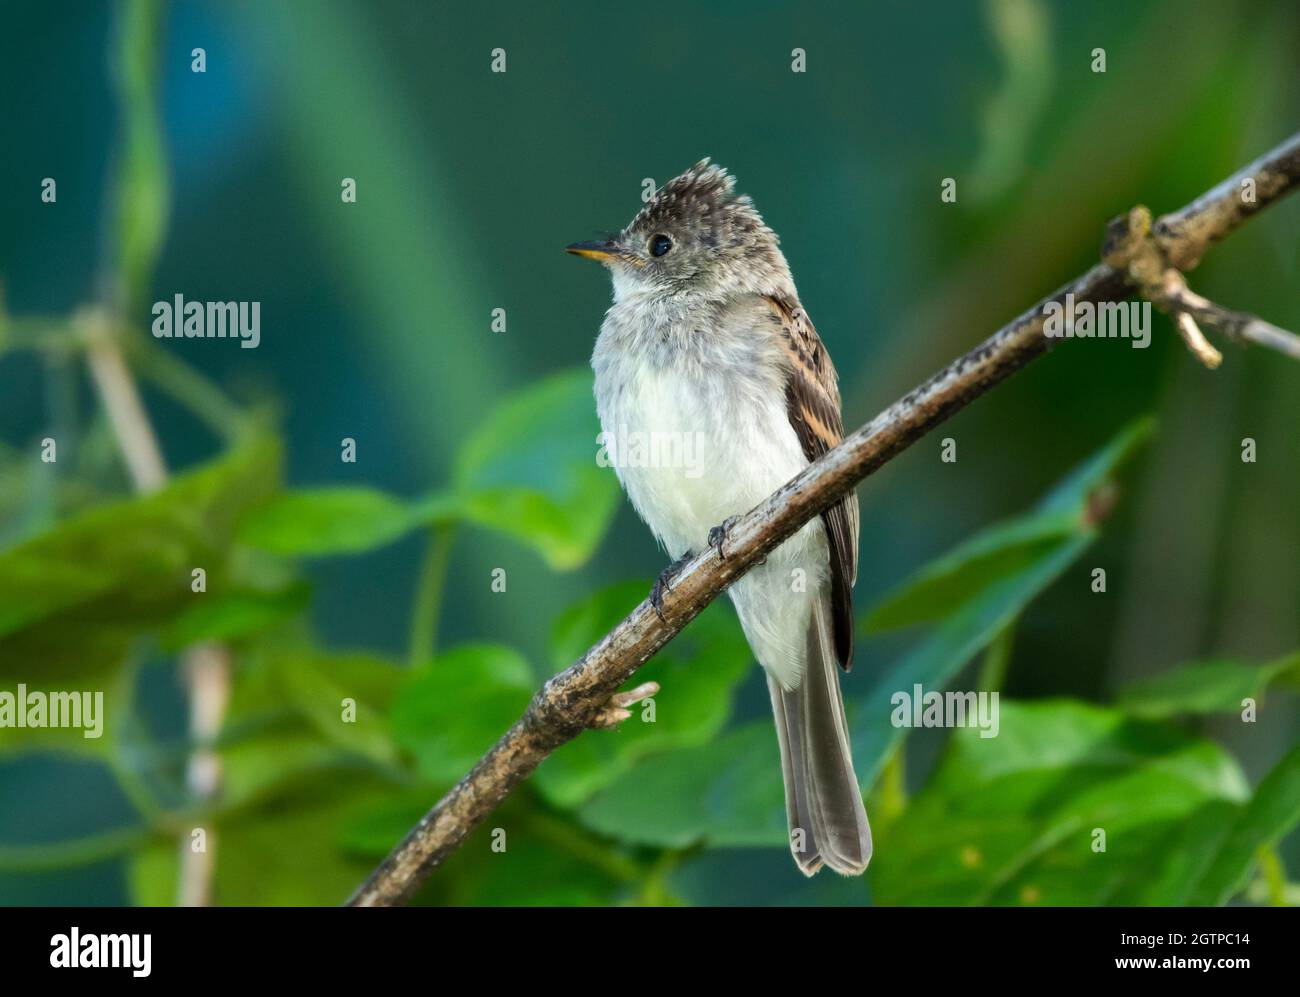 A young Tropical Pewee, Contopus cinereus, perching on a branch in the rainforest of Trinidad with leaves blurred in the background. Stock Photo